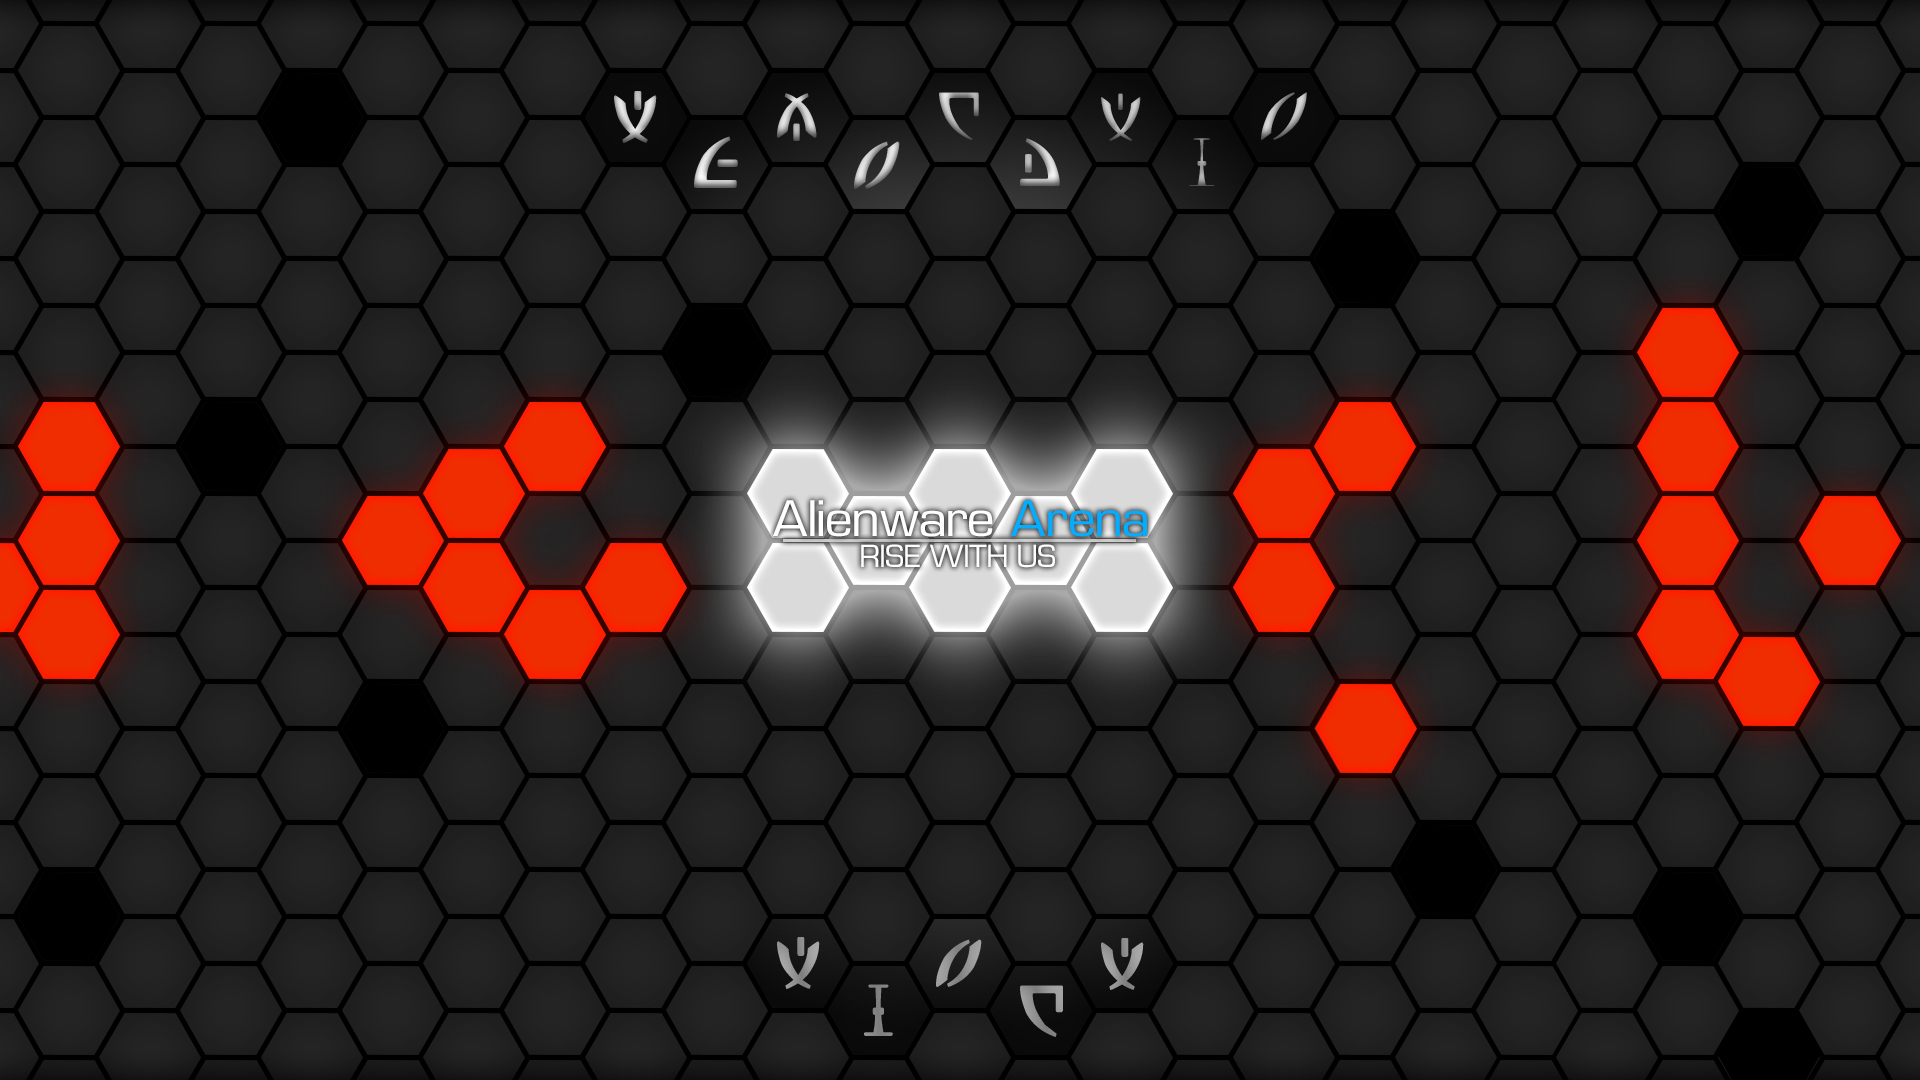 Alienware Arena Hive Wallpaper 1080p By Thekloakedone On